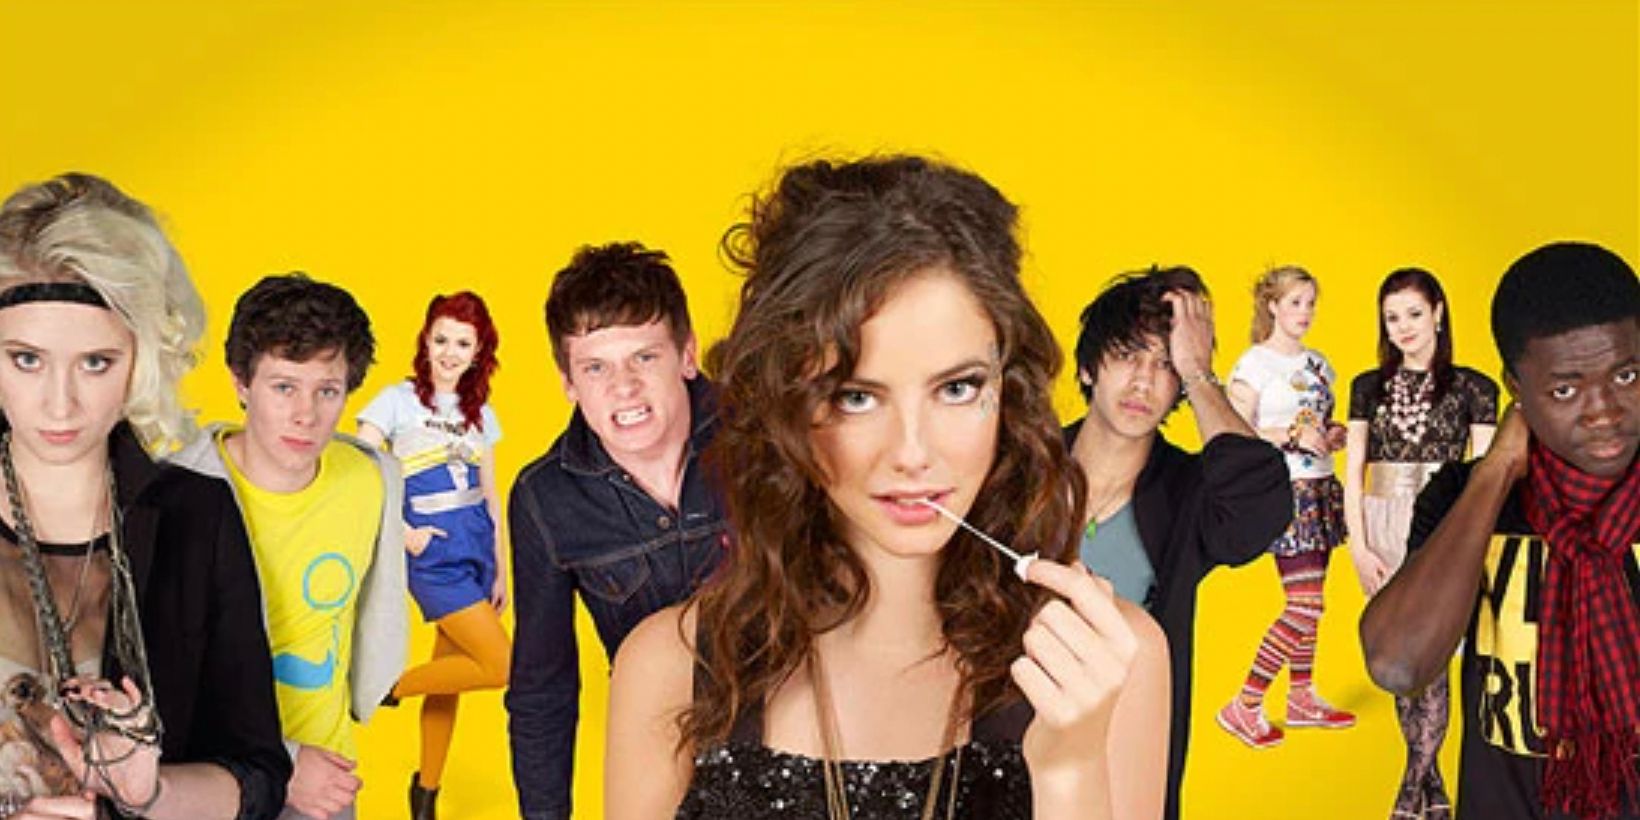 The cast of Skins season 4 against a yellow background with Effy pulling her gum in the center